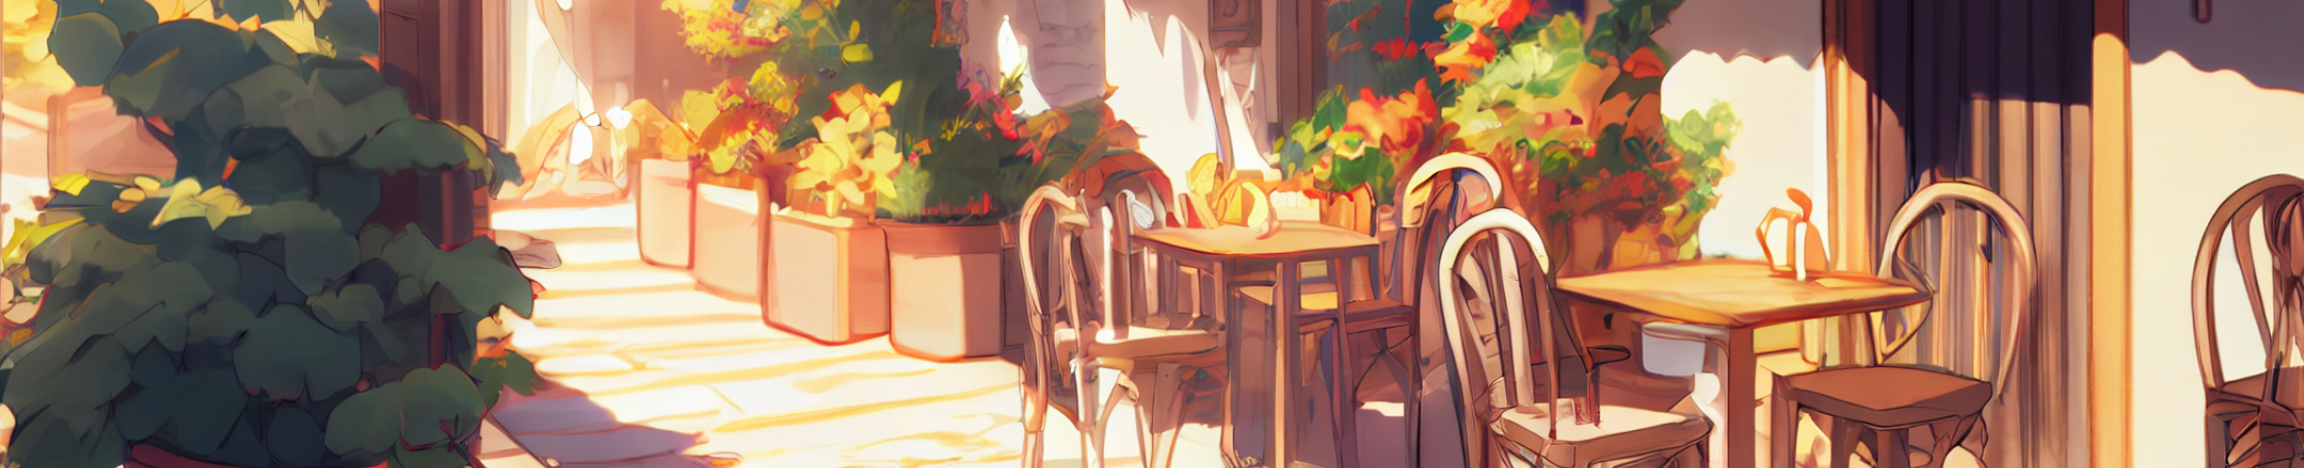 Backgrounds - Restaurants and Cafes